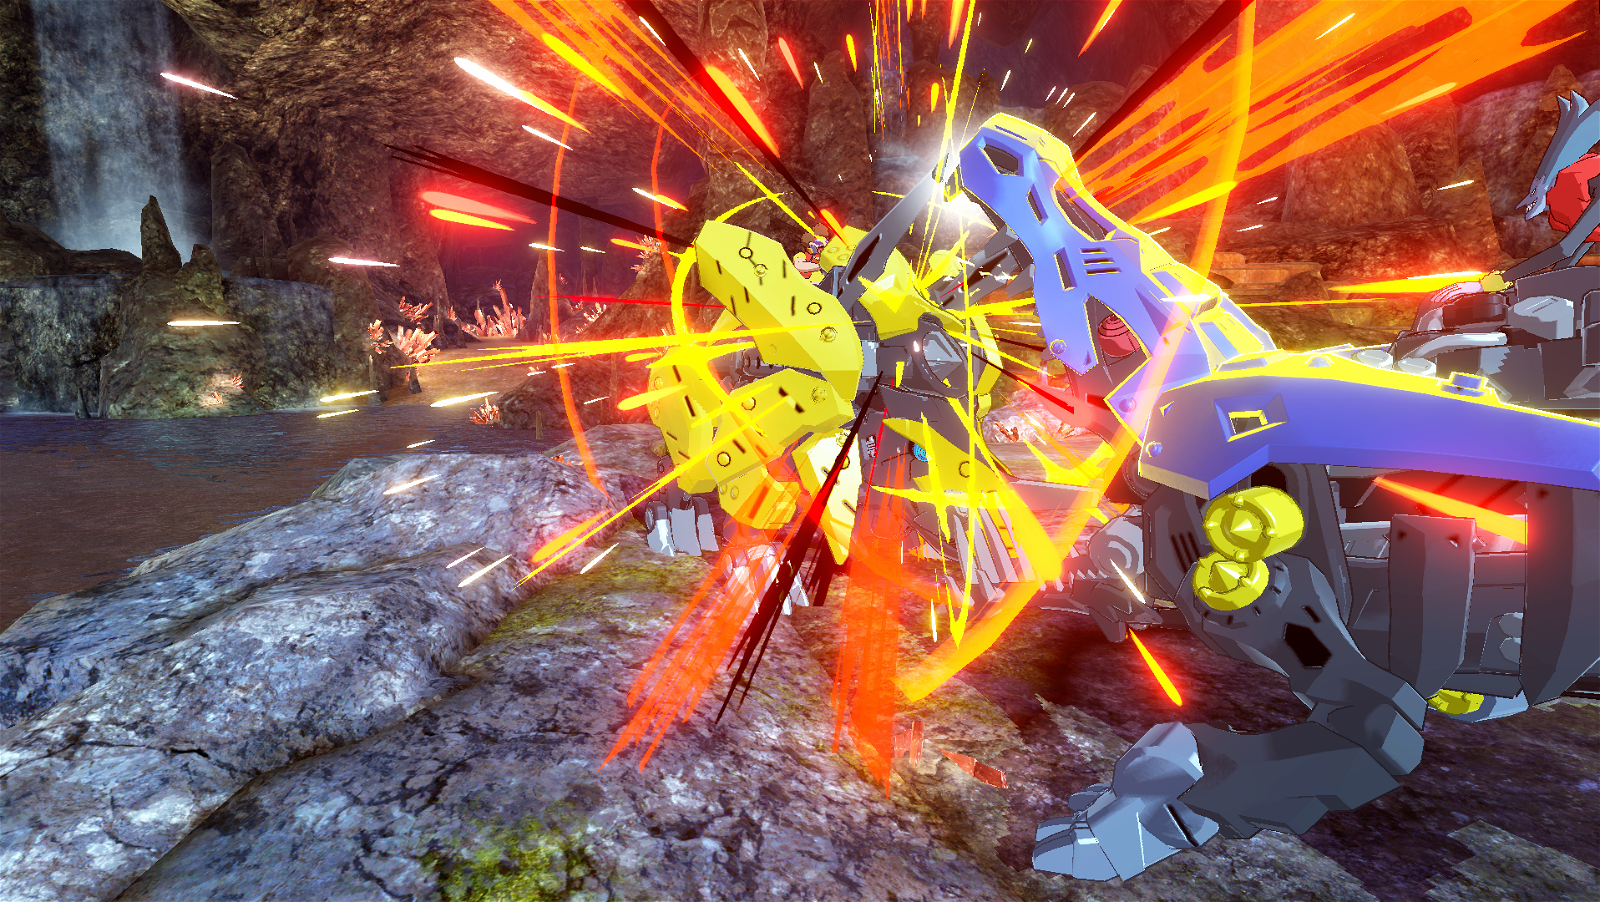 Zoids Wild: Blast Unleashed, Zoids Wild: King of Blast, Zoids Wild Blast Unleashed, Zoids Wild, Nintendo Switch, Switch, Europe, North America, Release Date, Gameplay, Features, Price, Pre-order, Trailer, Outright Games